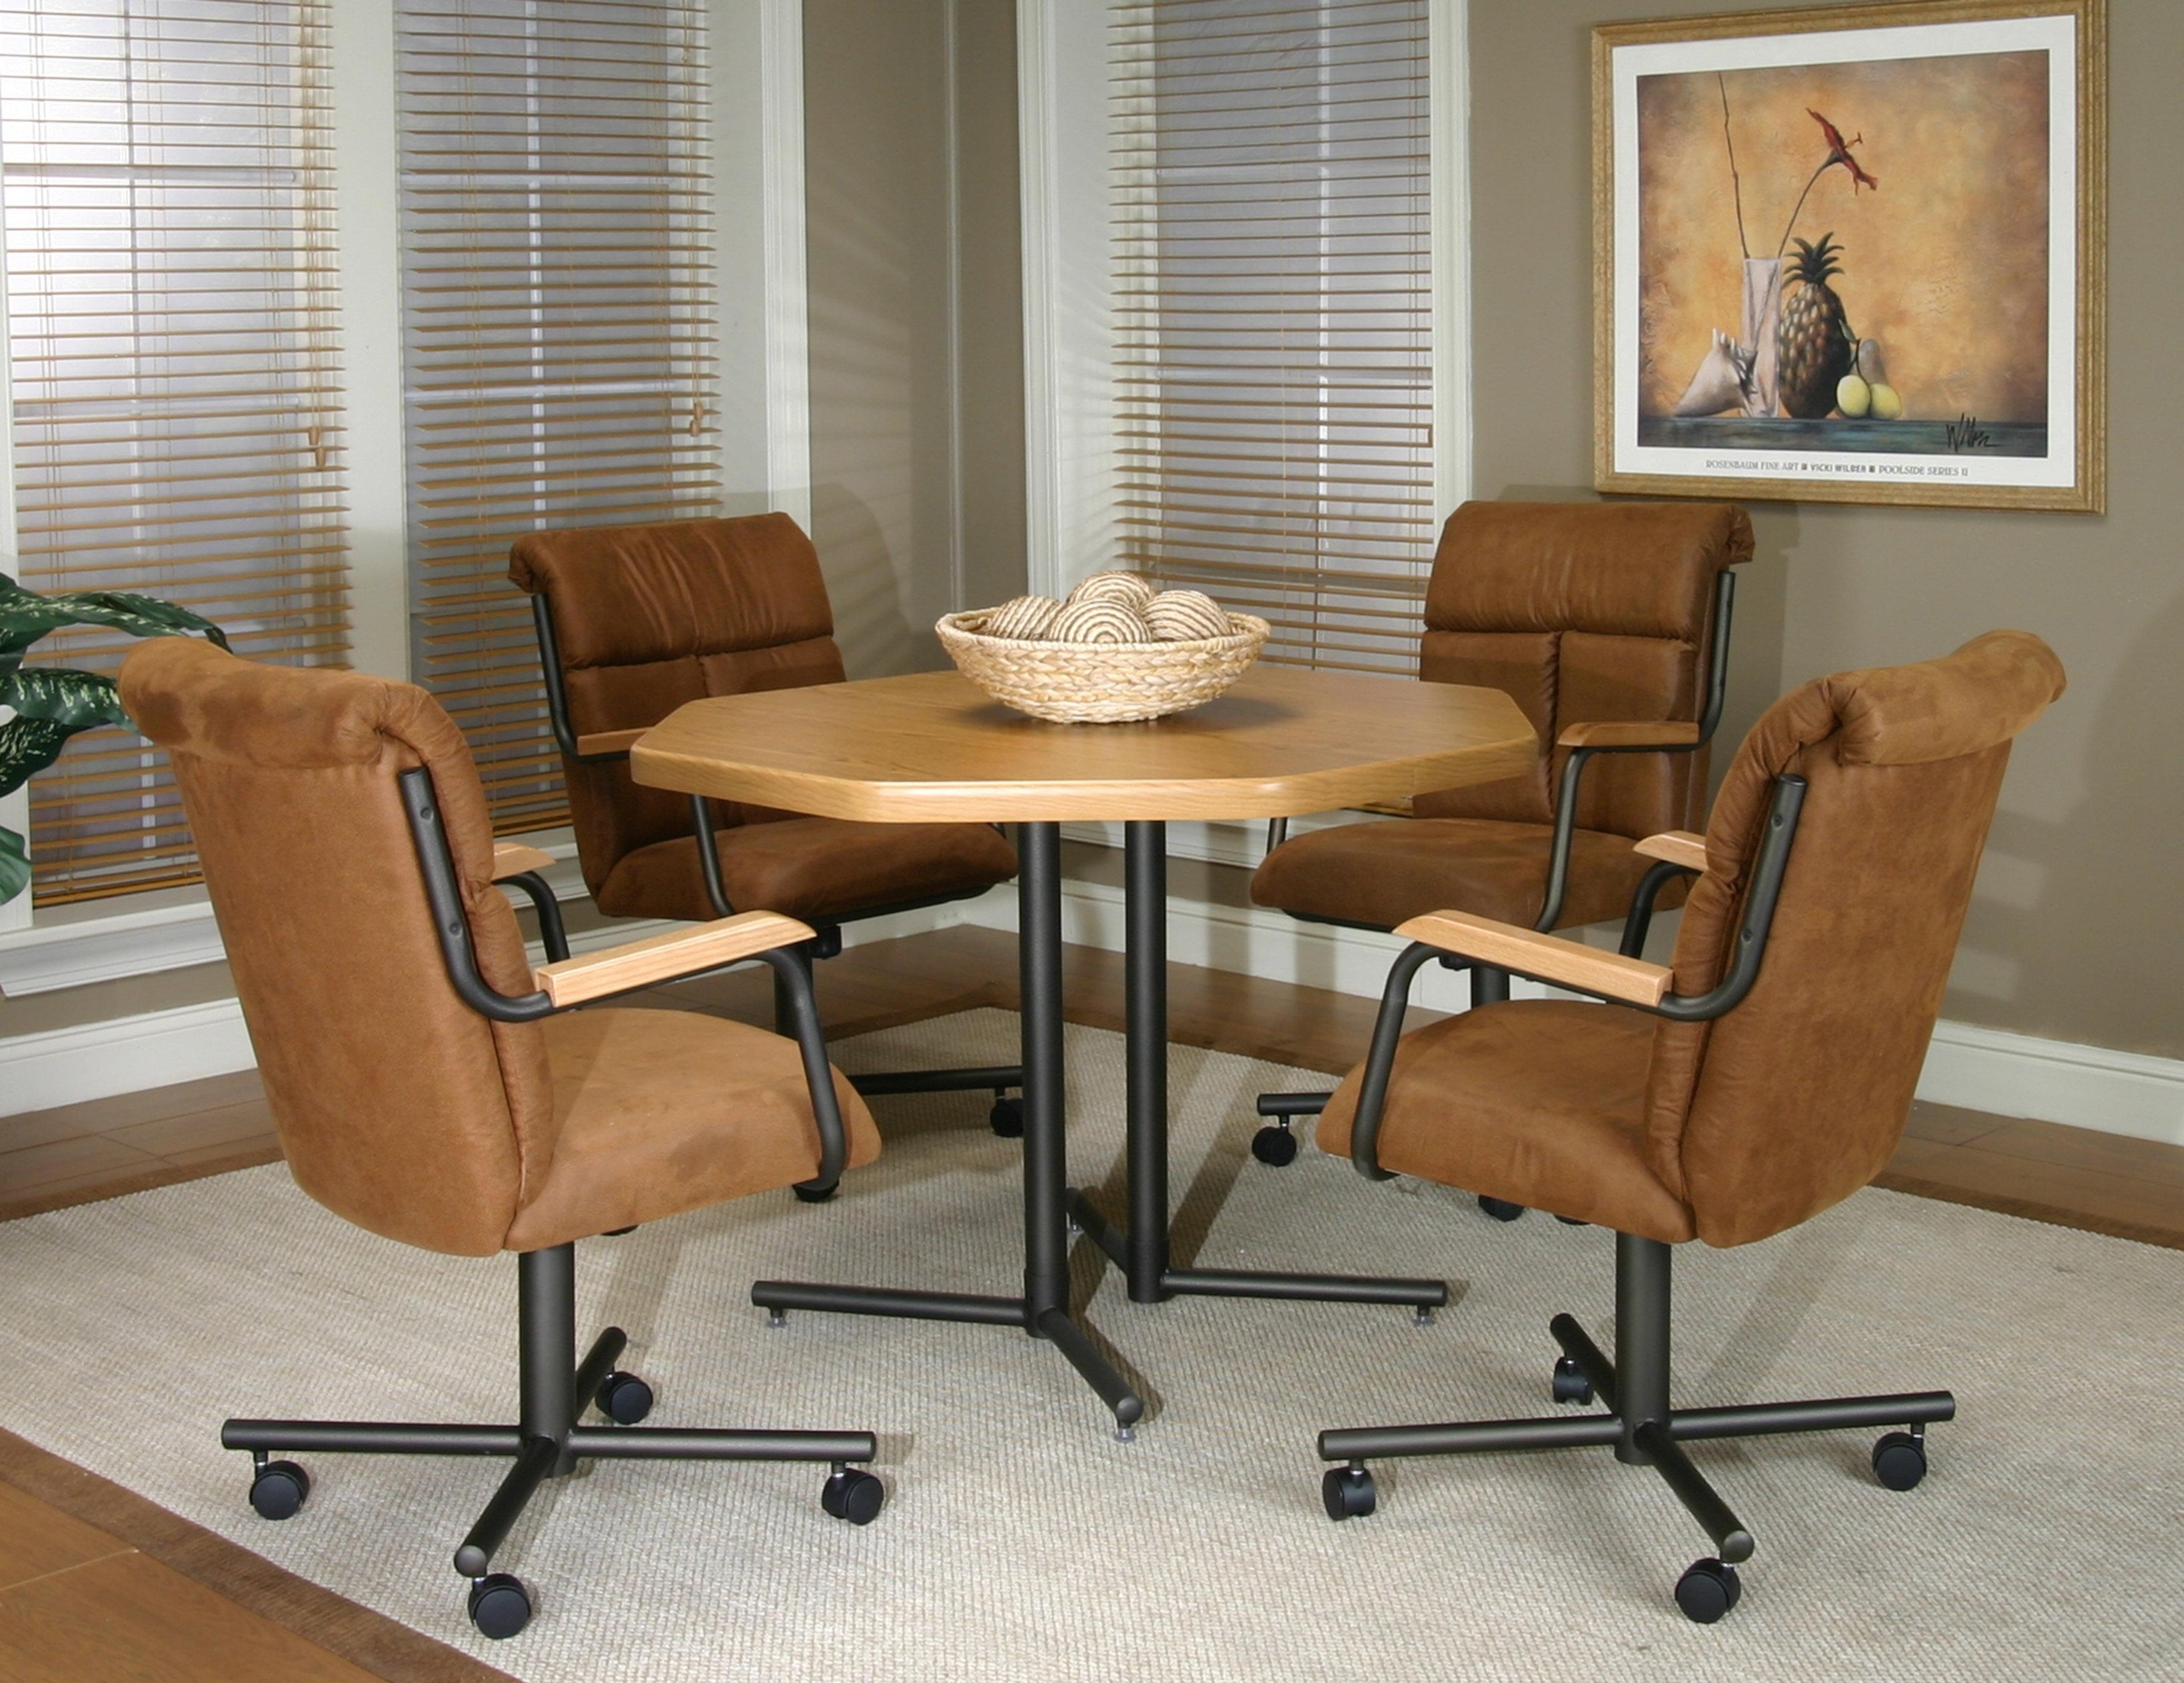 Dining Chairs With Casters Visualhunt, Leather Kitchen Chairs With Casters